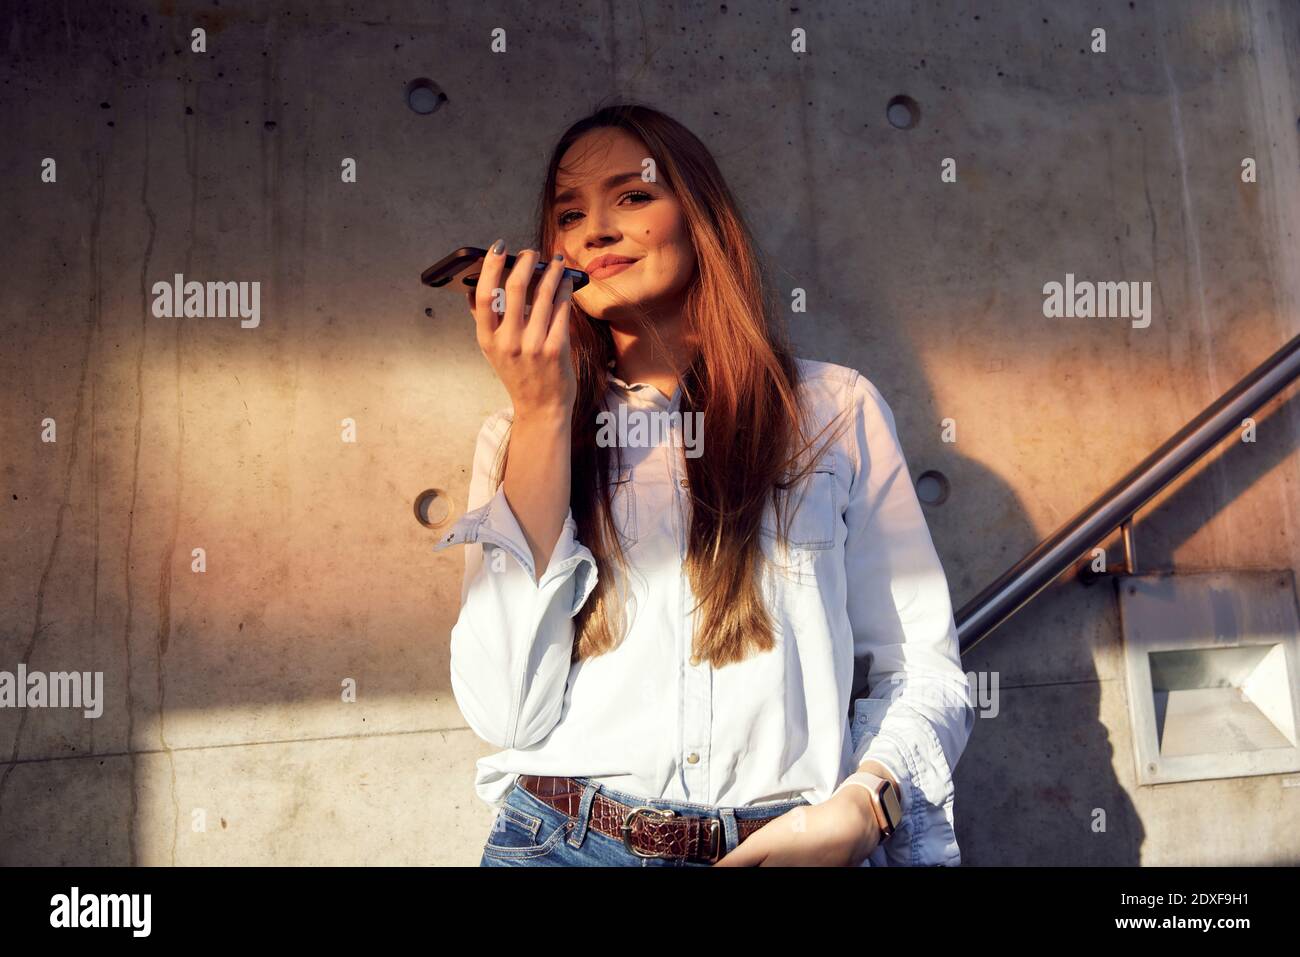 Young businesswoman with hands in pockets talking on mobile phone while standing against wall Stock Photo